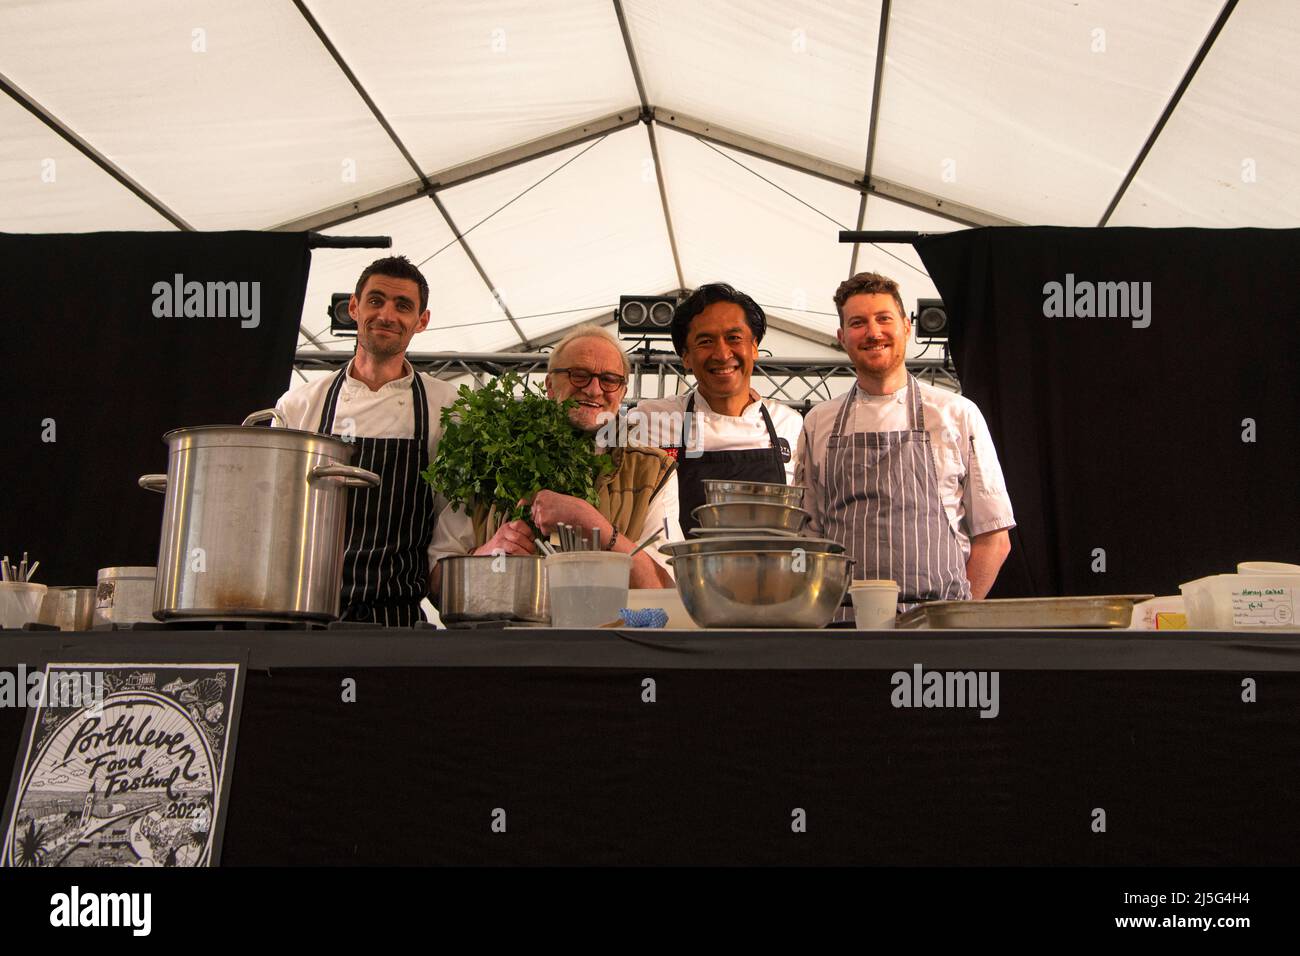 Cornwall, UK. 23rd Apr, 2022. Antony Worrall Thompson, assisted by Marcus Houghton, Jude Kereama assisted by his head chef, Peter Almond, Cornwall's favourite food and music festival in the village of Porthleven Food Festival, 2022 Festival taking place April 22-24. A free local festival of food and music. created by the people of Porthleven and surrounds. Credit: kathleen white/Alamy Live News Credit: kathleen white/Alamy Live News Stock Photo